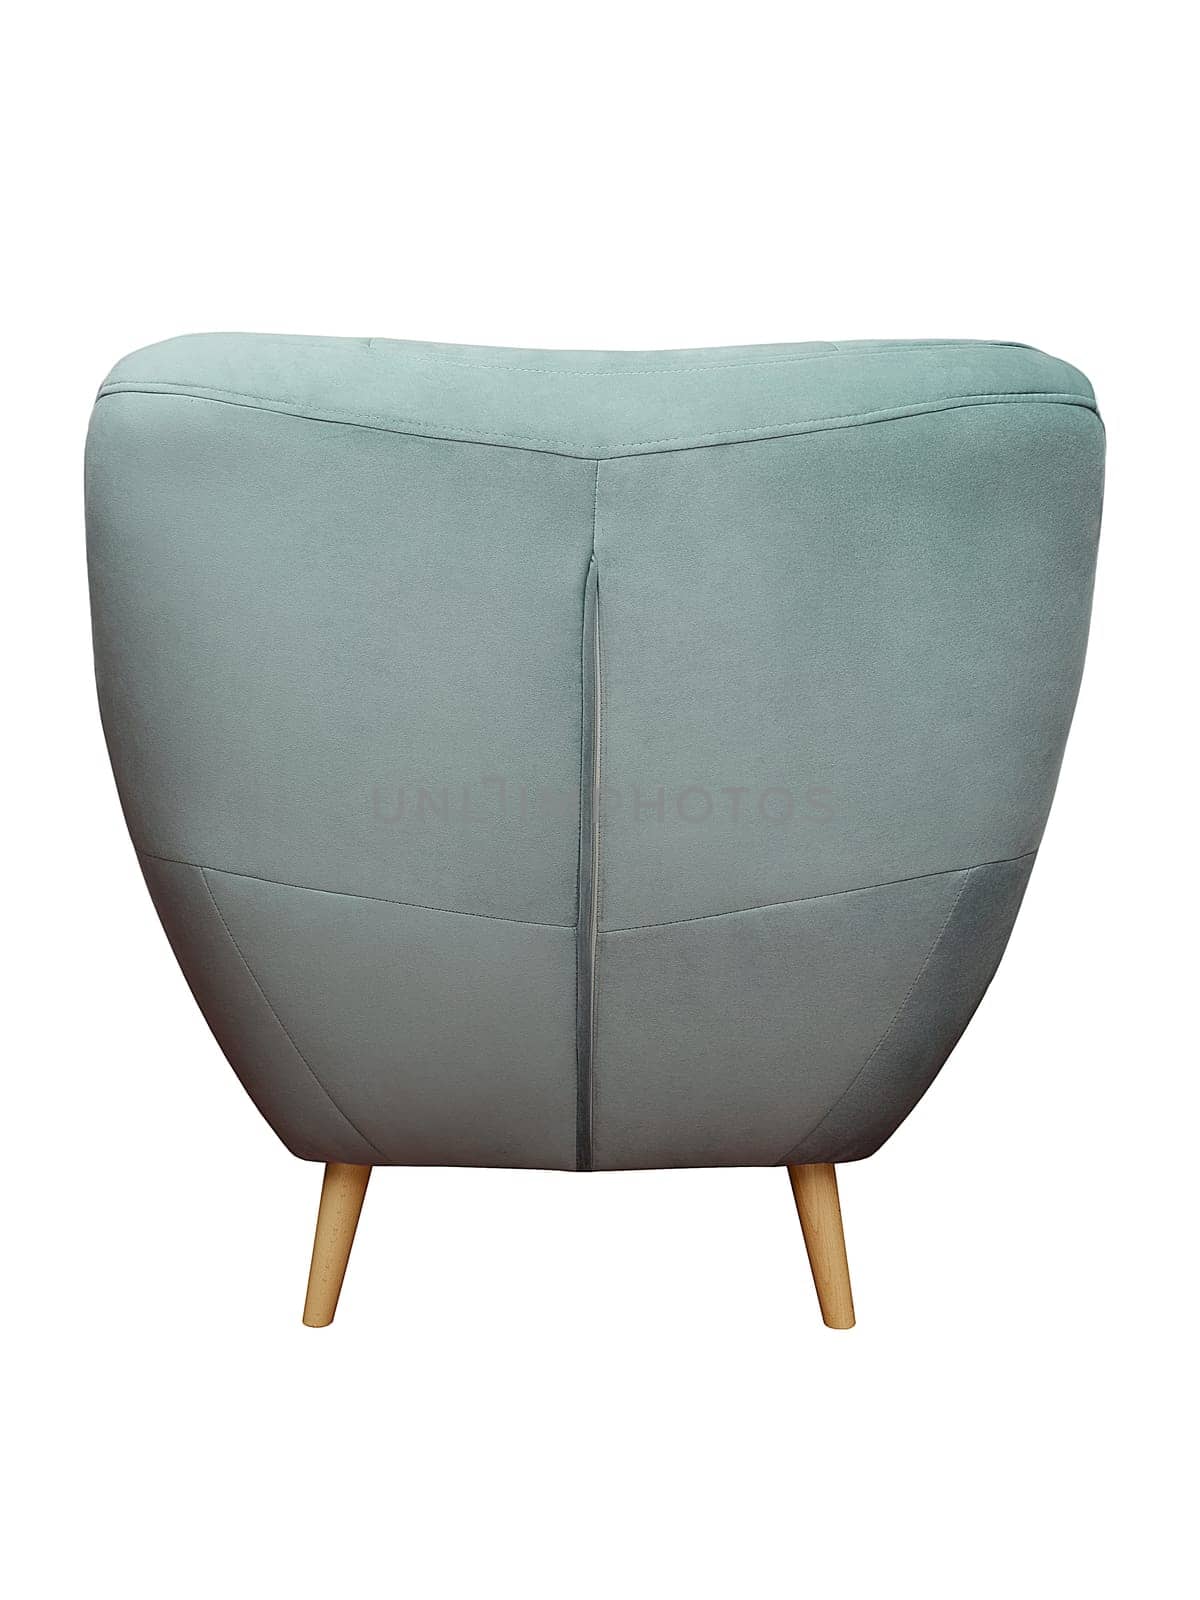 Modern grey fabric armchair with wooden legs isolated on white background, back view. furniture, interior, home design in minimal style